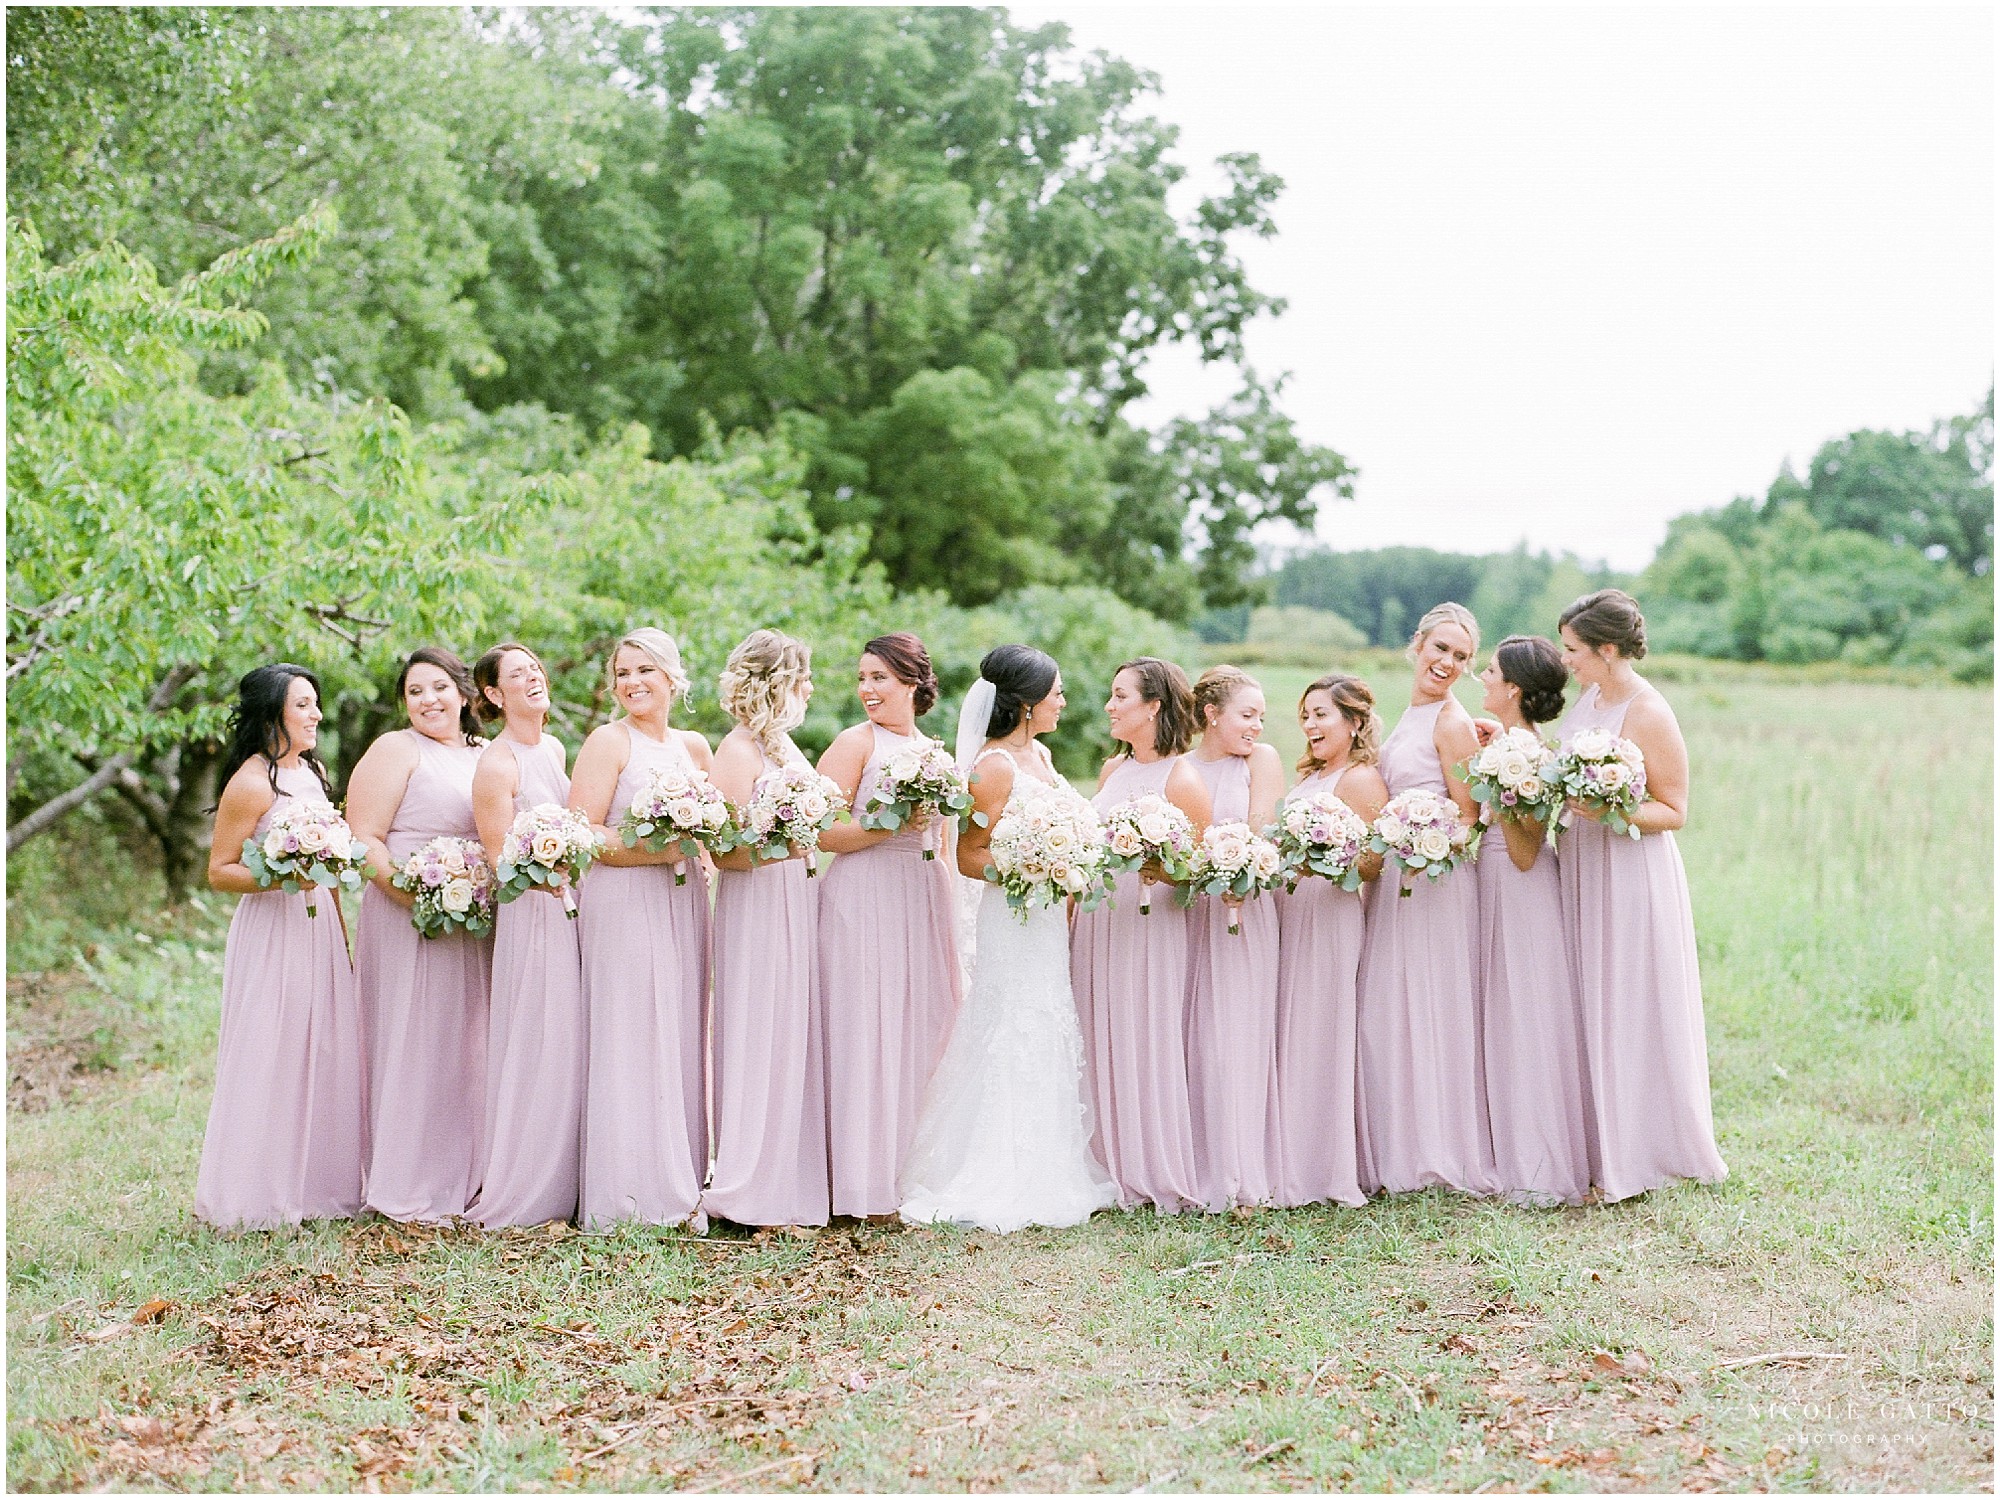 Blush bridesmaids dresses with rustic location